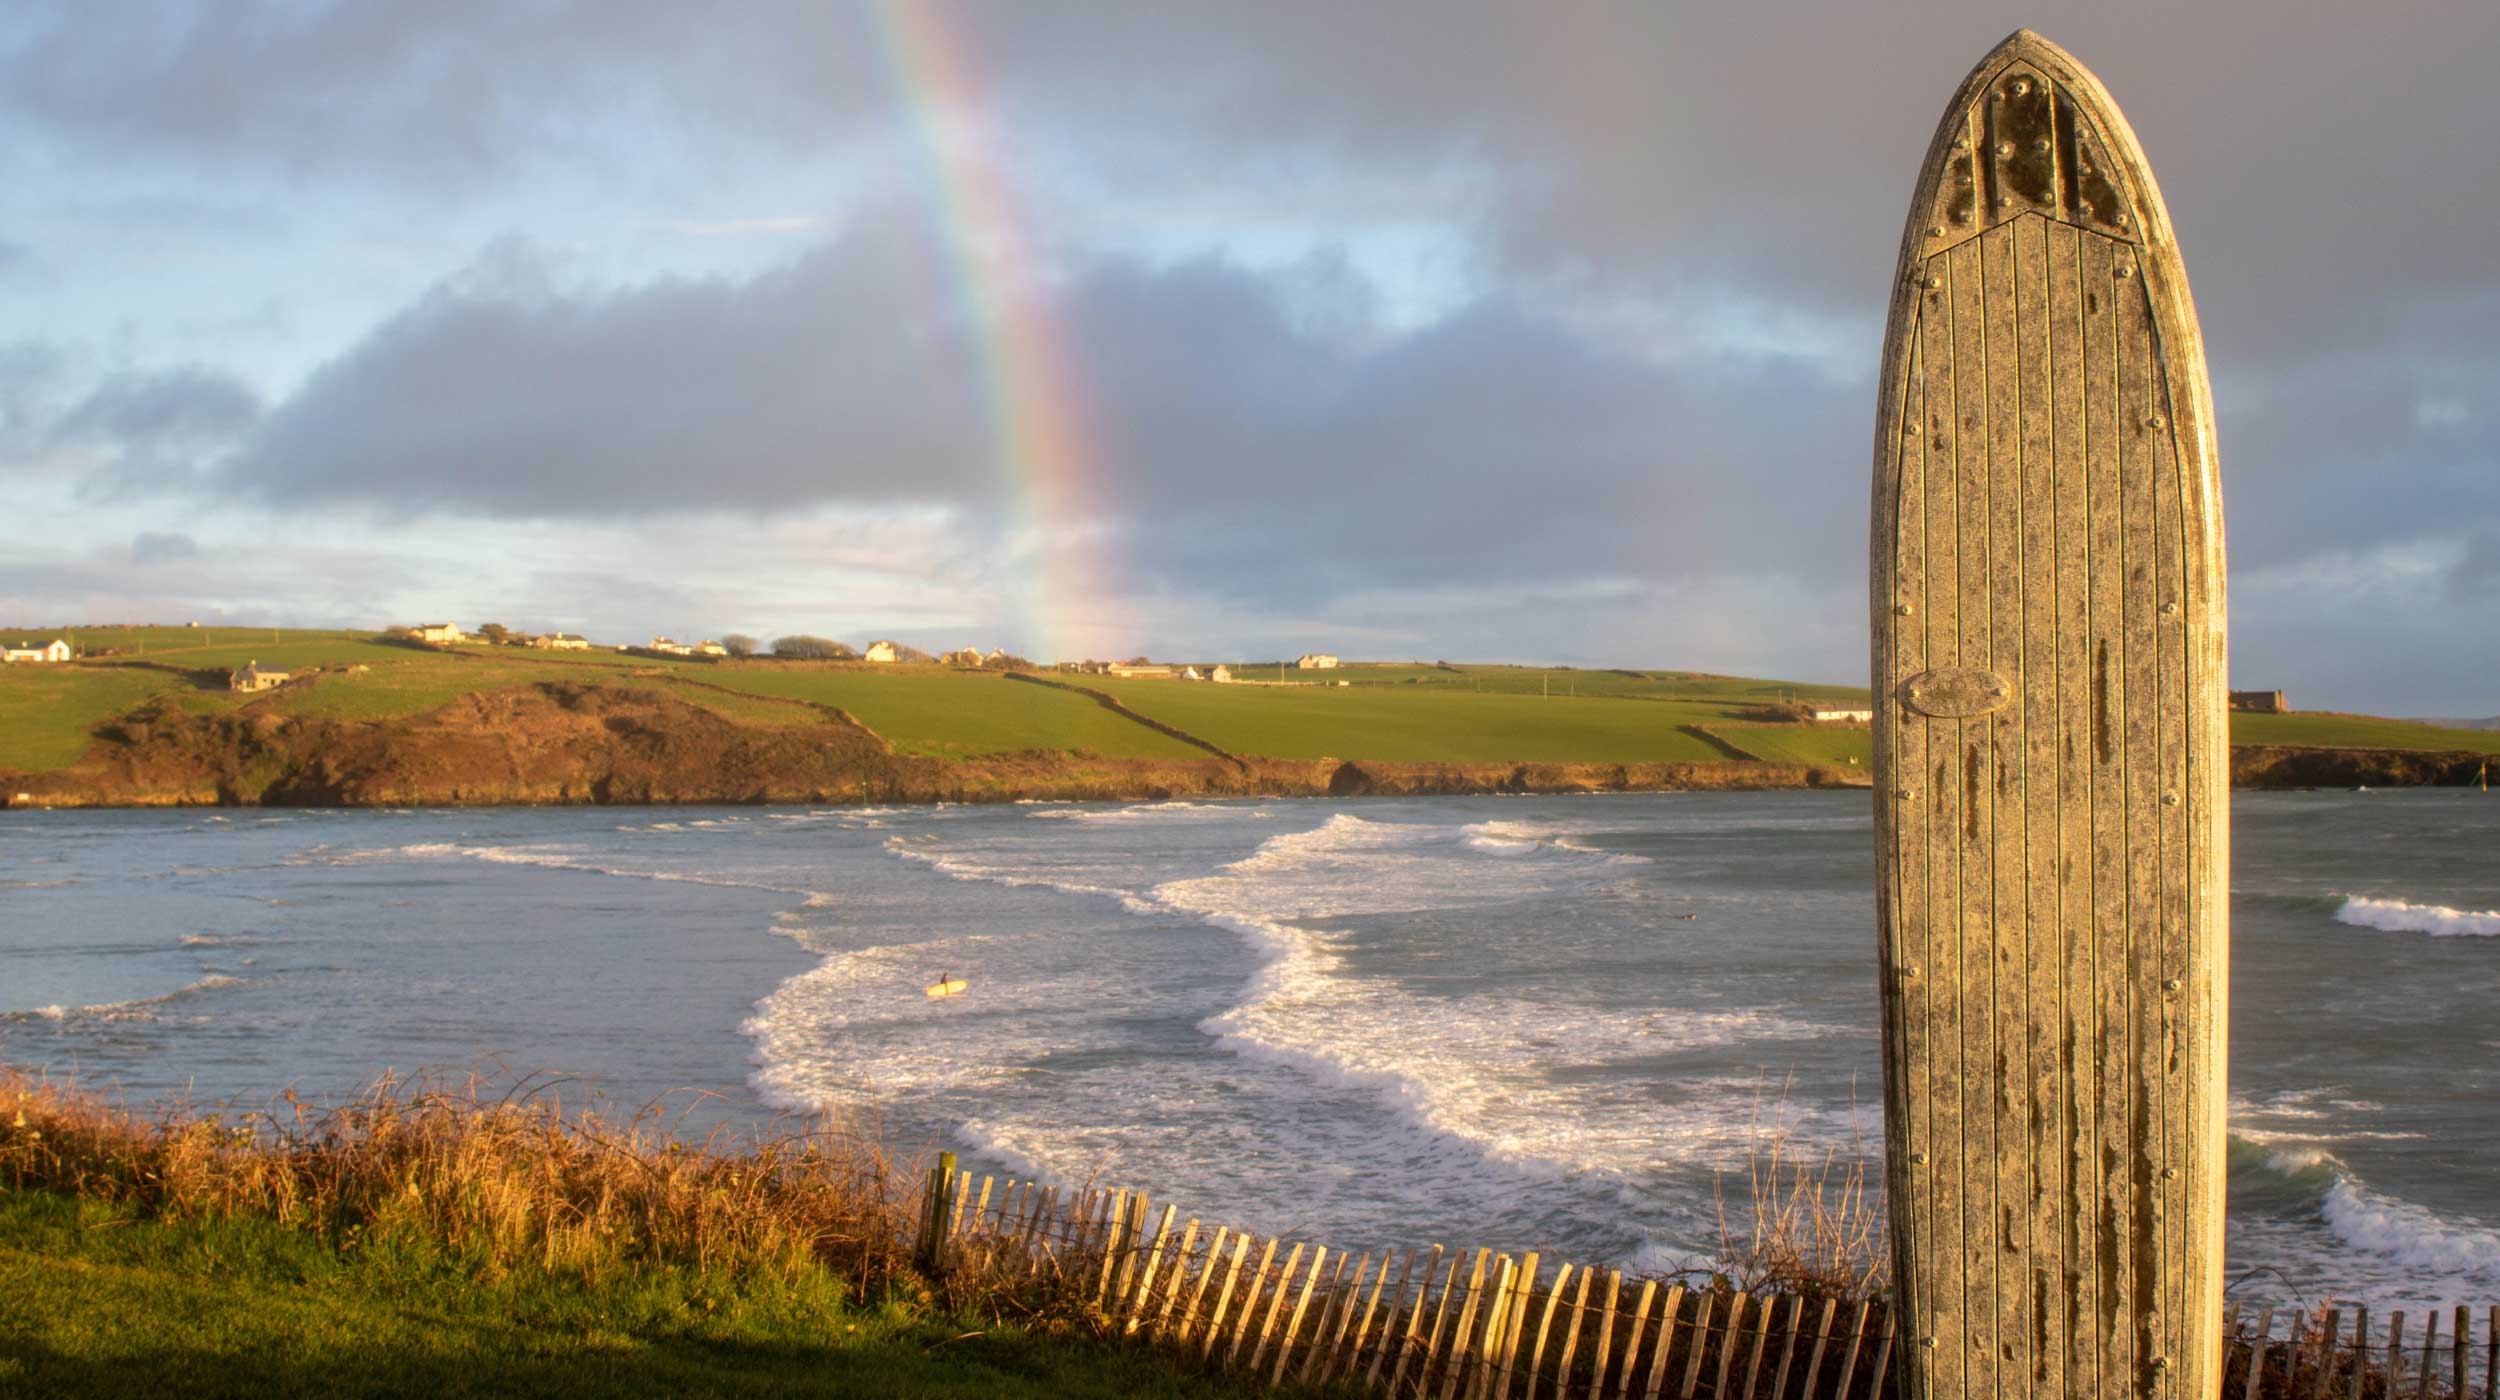 A sunset change in the weather creates a rainbow against a sandy beach at high tide in County Cork Ireland.